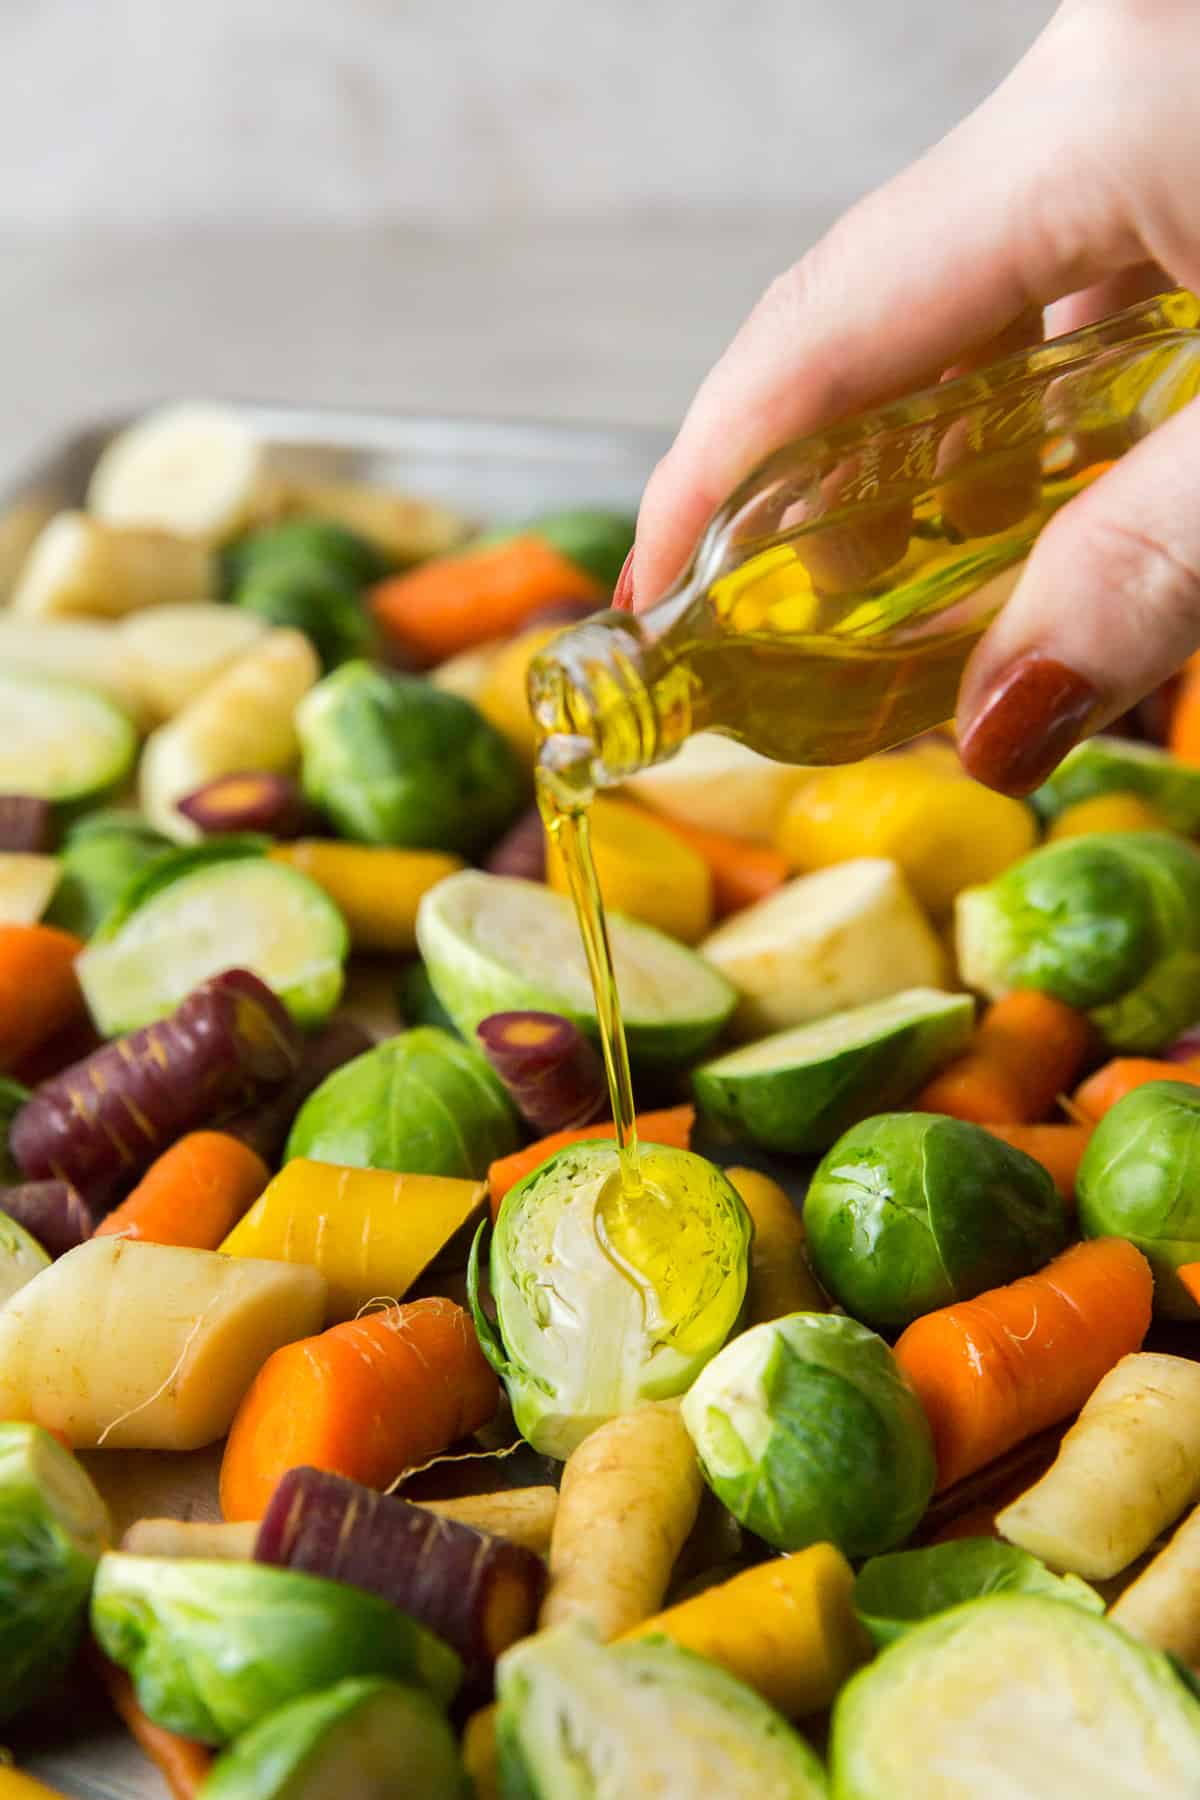 Oil is poured on to vegetables on a baking sheet.